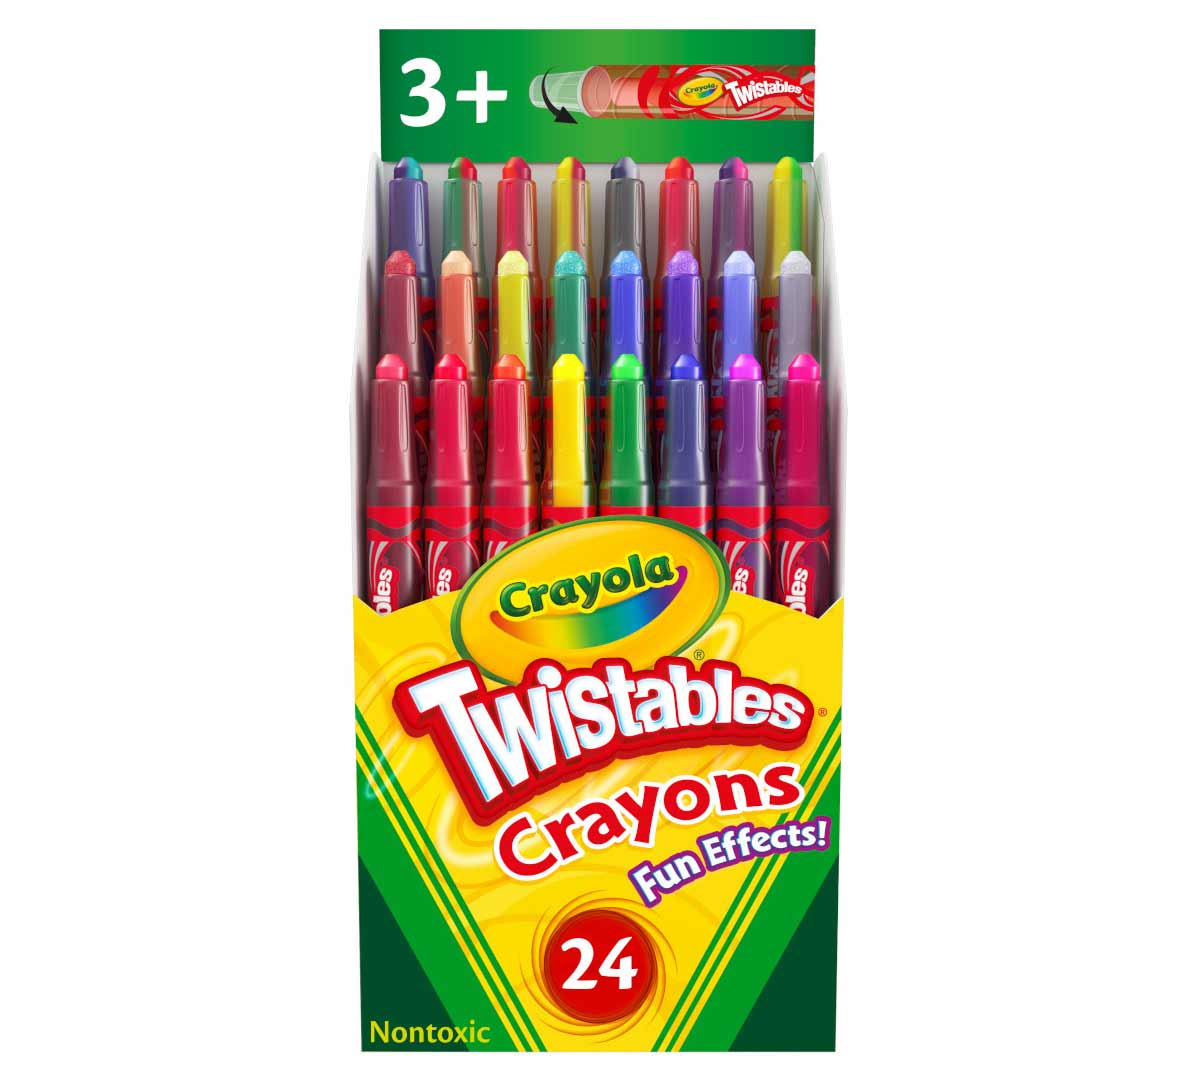 Silly Scents Mini Twistables Scented Crayons, 24 Count